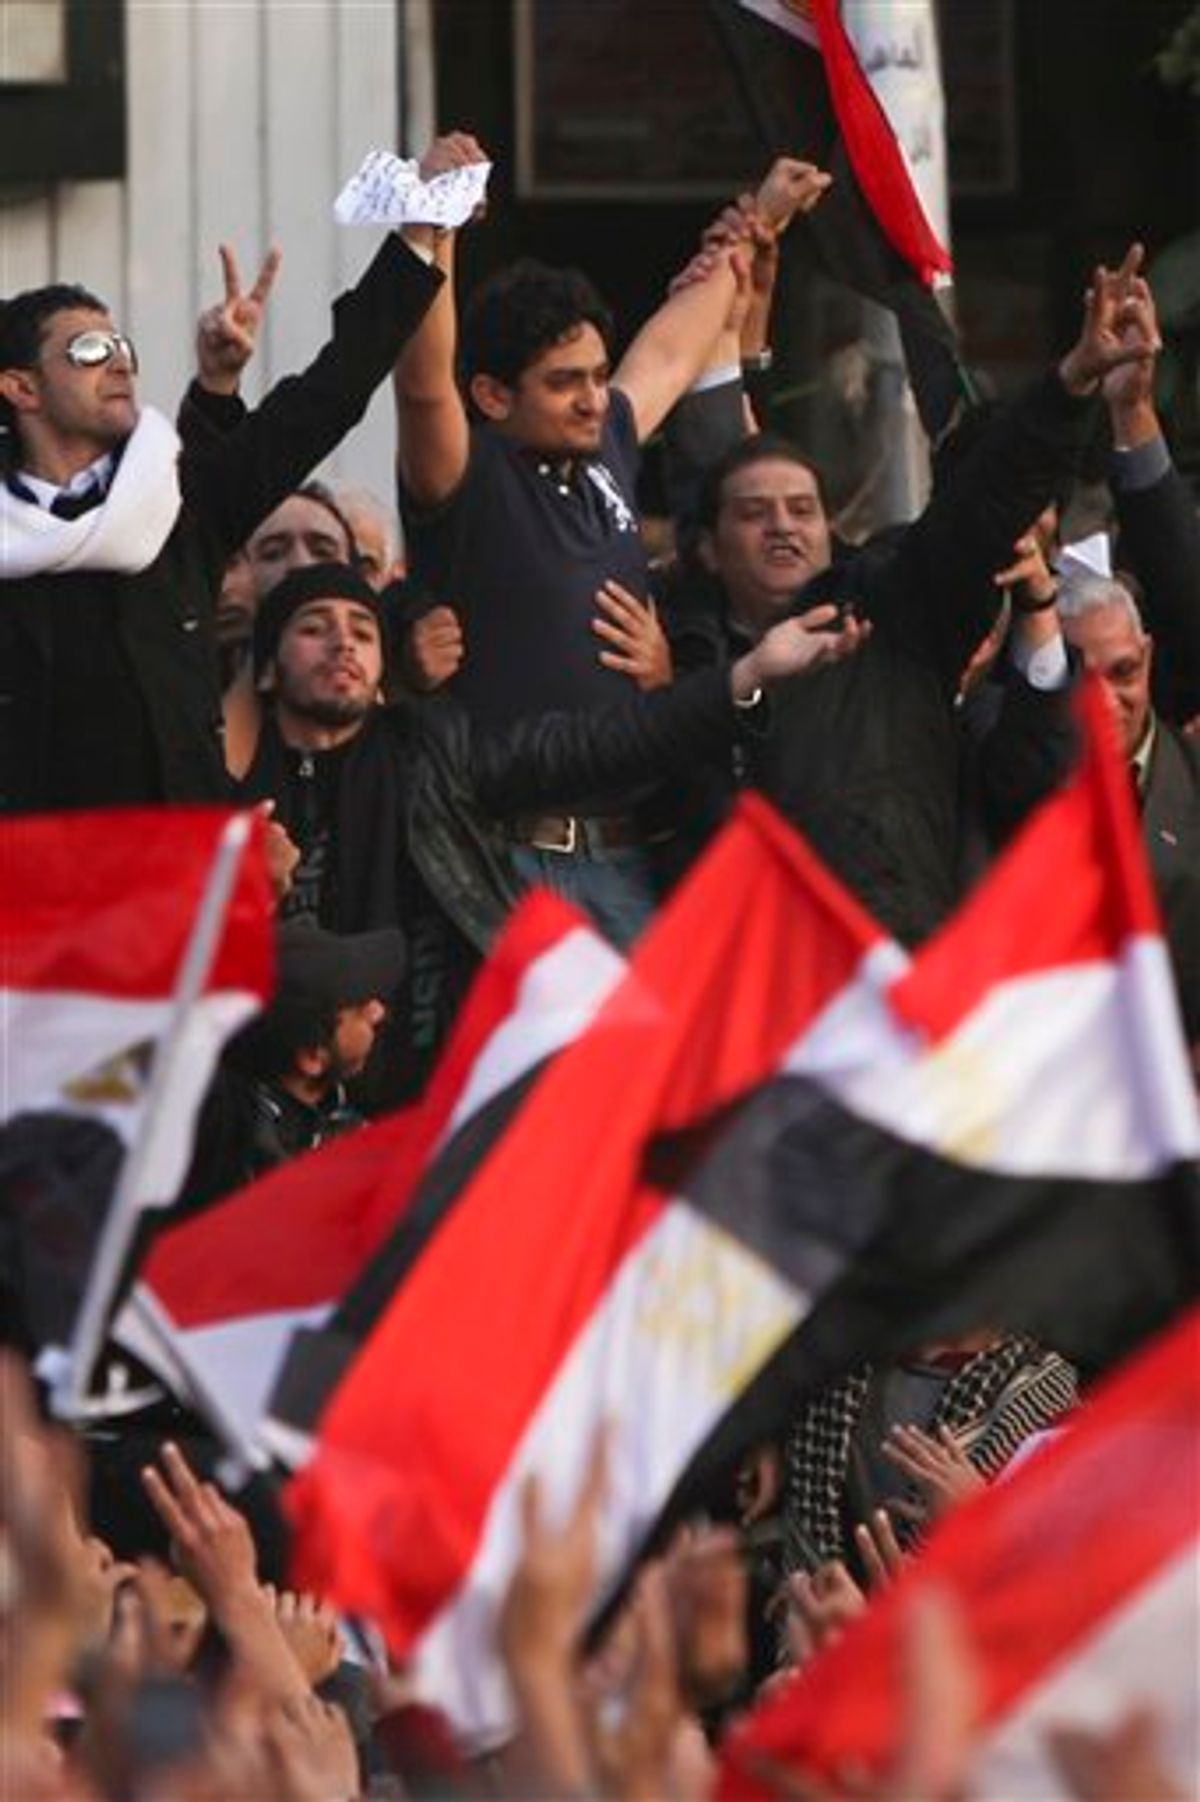 Egyptian Wael Ghonim, center, a 30-year-old Google Inc. marketing manager who was a key organizer of the online campaign that sparked the first protest on Jan. 25, gestures to the crowd in Tahrir Square, in Cairo, Egypt, Tuesday, Feb. 8, 2011. A young leader of Egypt's anti-government protesters, newly released from detention, joined a massive crowd of hundreds of thousands in Cairo's Tahrir Square for the first time Tuesday, greeted by cheers, whistling and thunderous applause when he declared: "We will not abandon our demand and that is the departure of the regime." (AP Photo/Tara Todras-Whitehill) (AP)